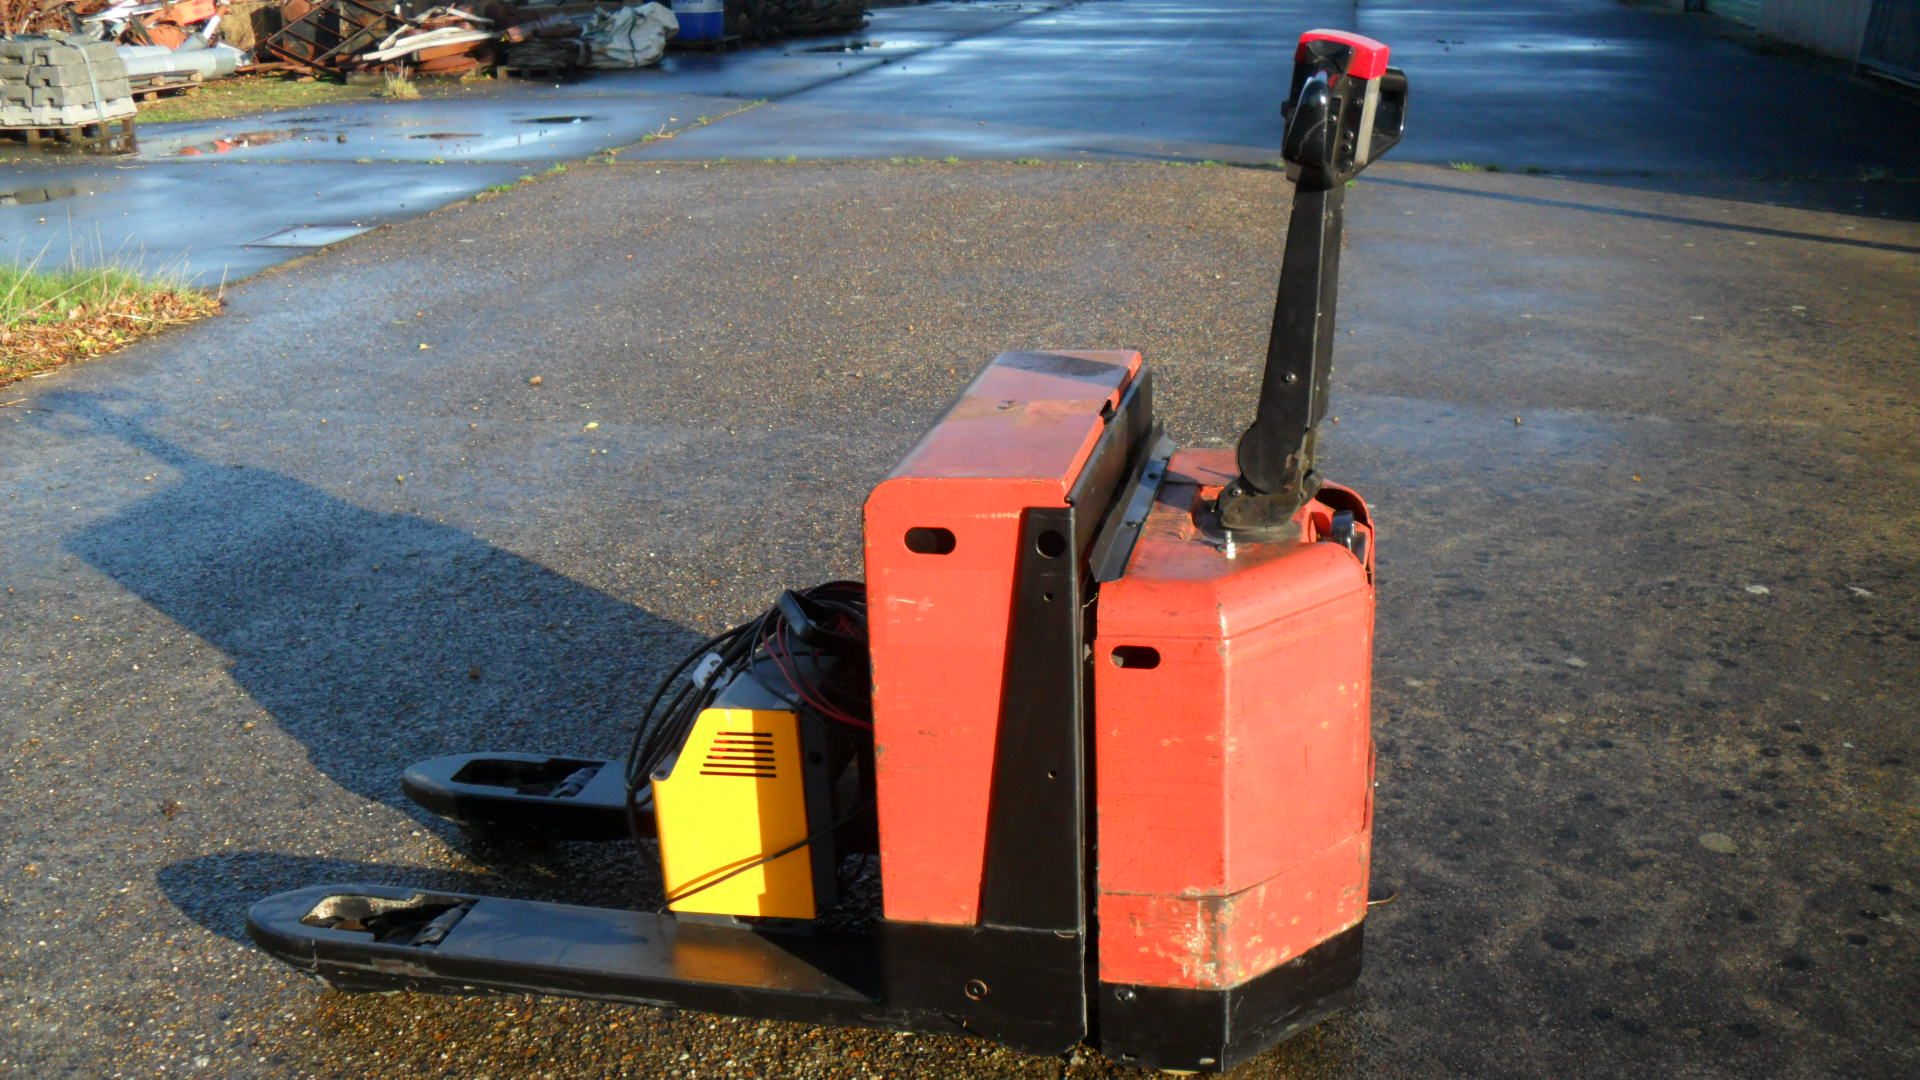 Toyota Power Pallet Truck, working order, with battery charger, 1000 x 680mm lifting legs.